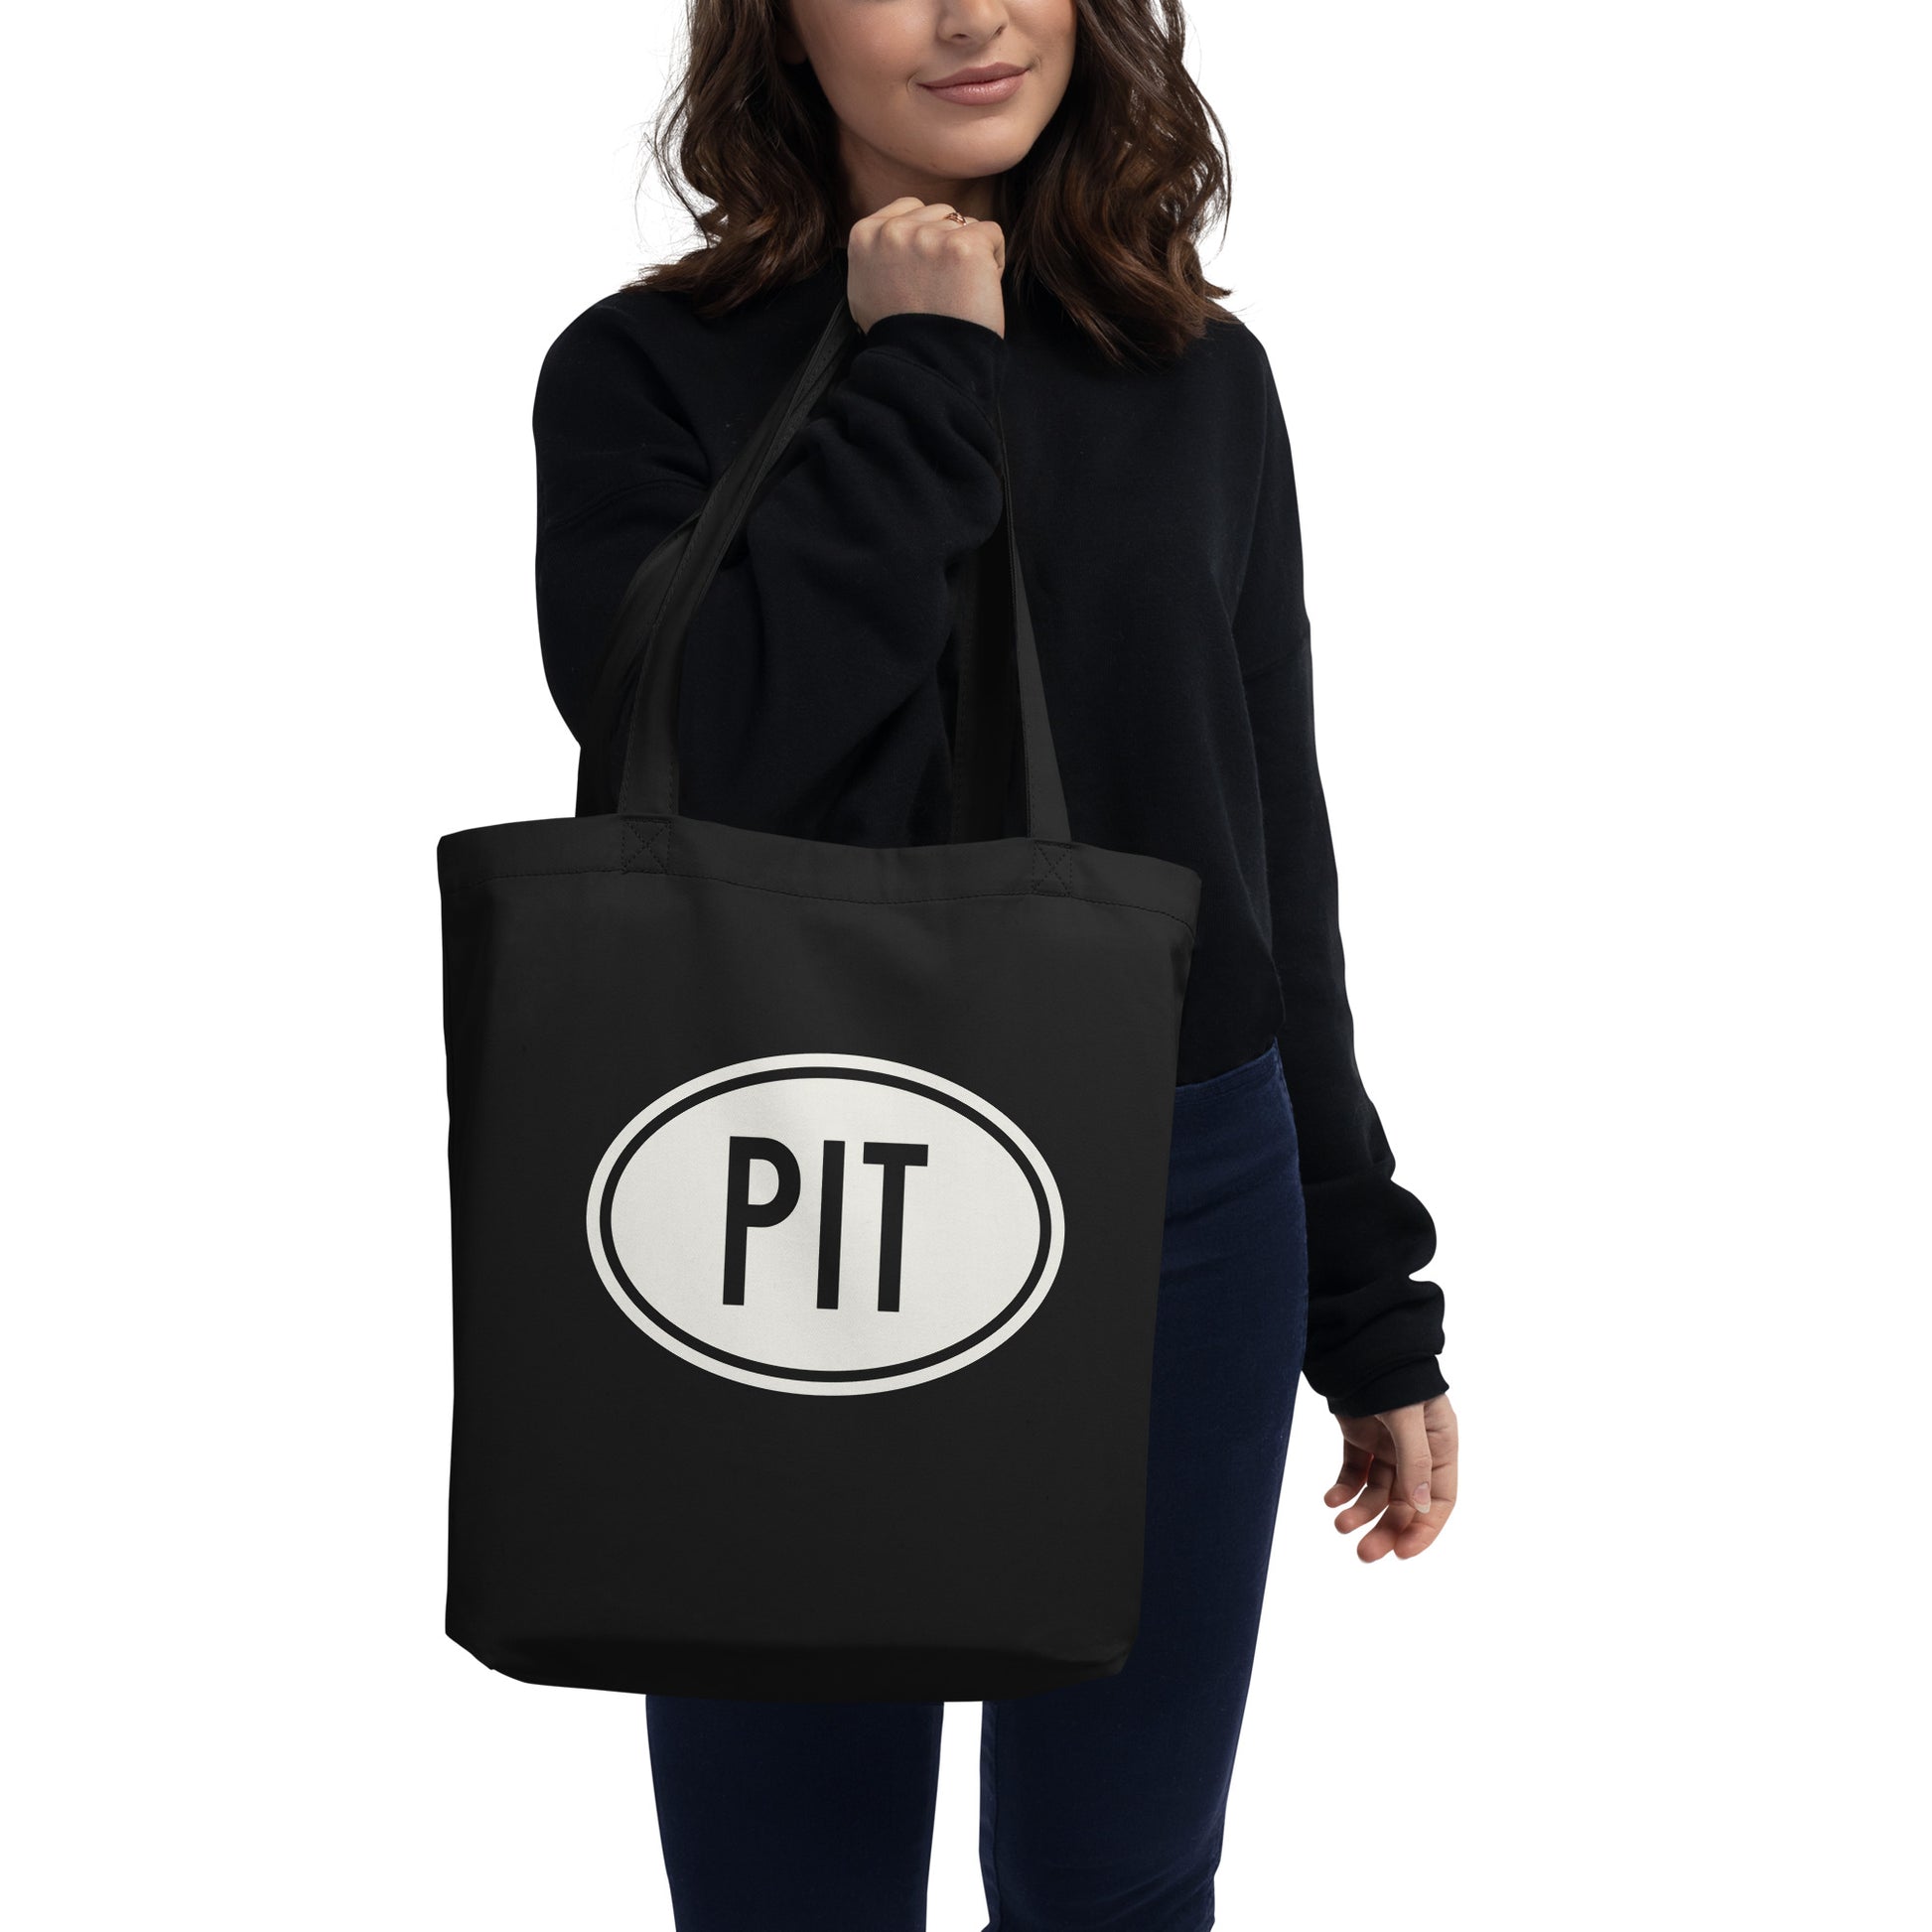 Unique Travel Gift Organic Tote - White Oval • PIT Pittsburgh • YHM Designs - Image 03